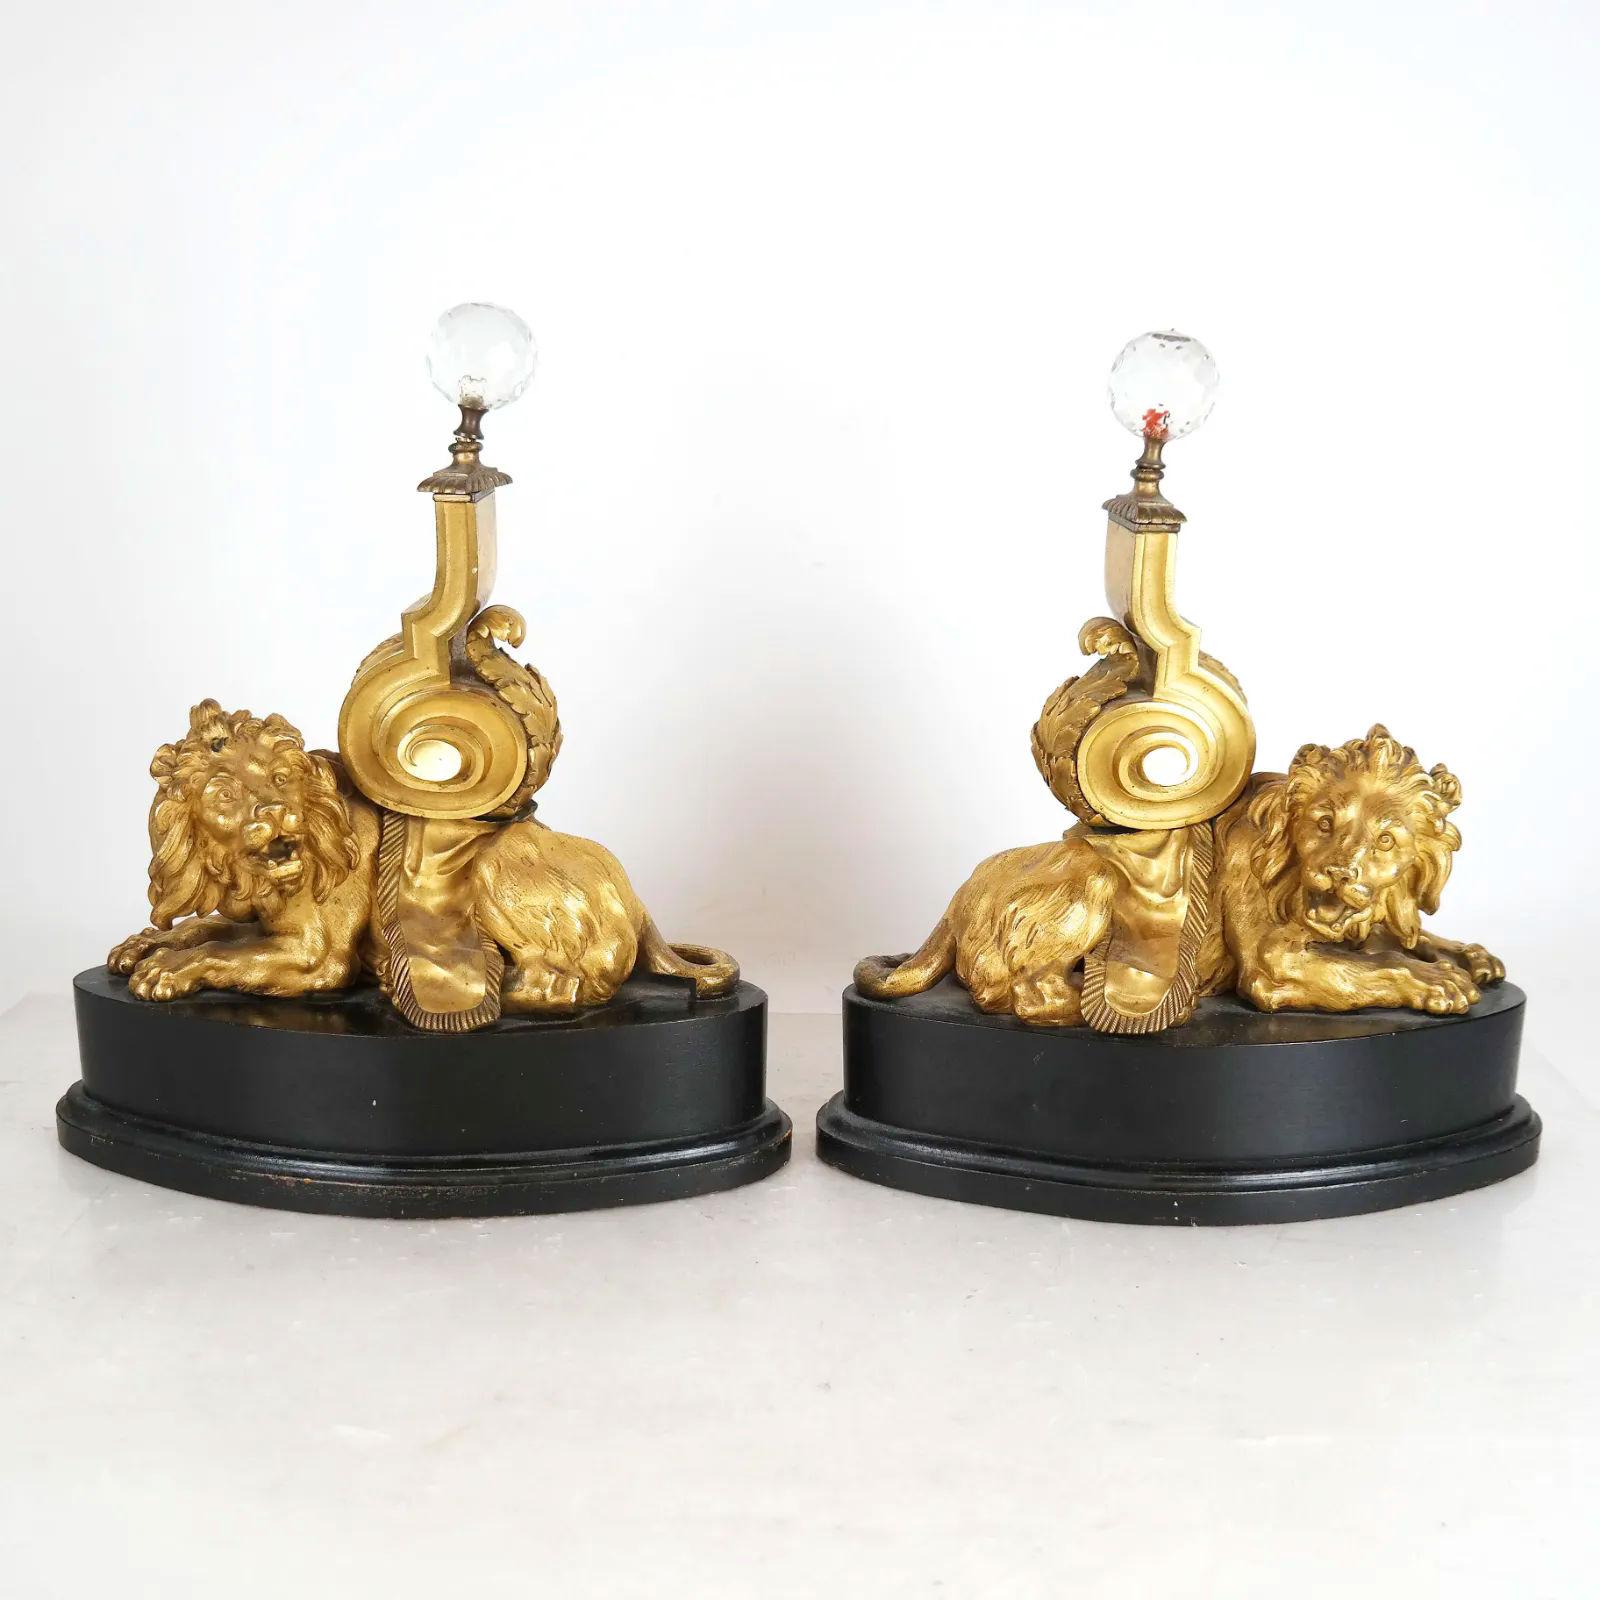 Our pair of nineteenth century ormolu bronze chenets were later mounted on ebonized wooden plinths for use at table lamps, currently with later spherical shaped crystal finials Sockets and wiring may be added for an additional fee.